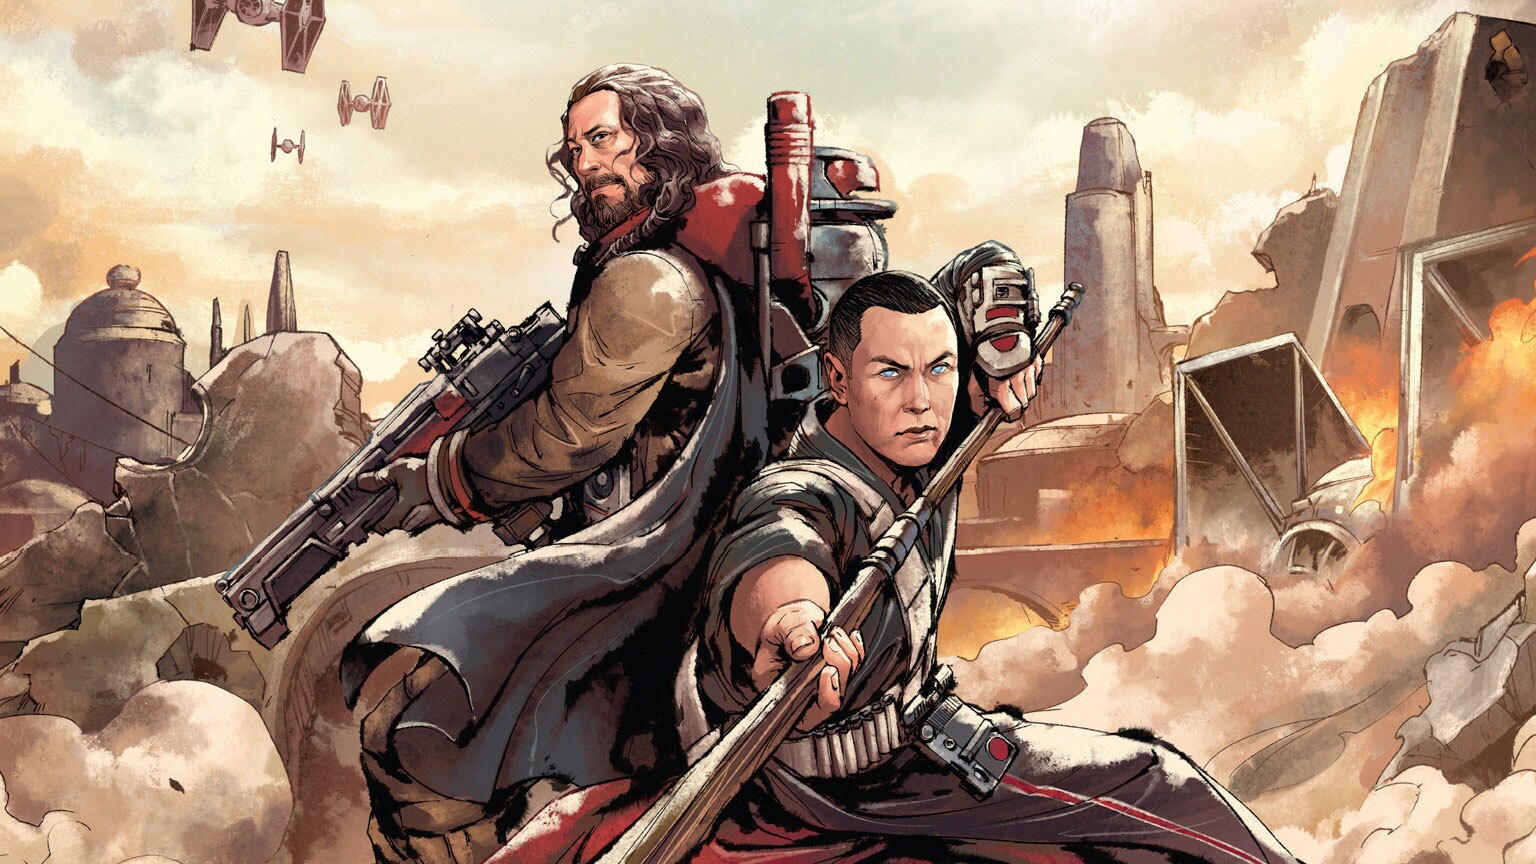 Greg Rucka Talks Chirrut, Baze, and the Cost of War in Star Wars: Guardians of the Whills